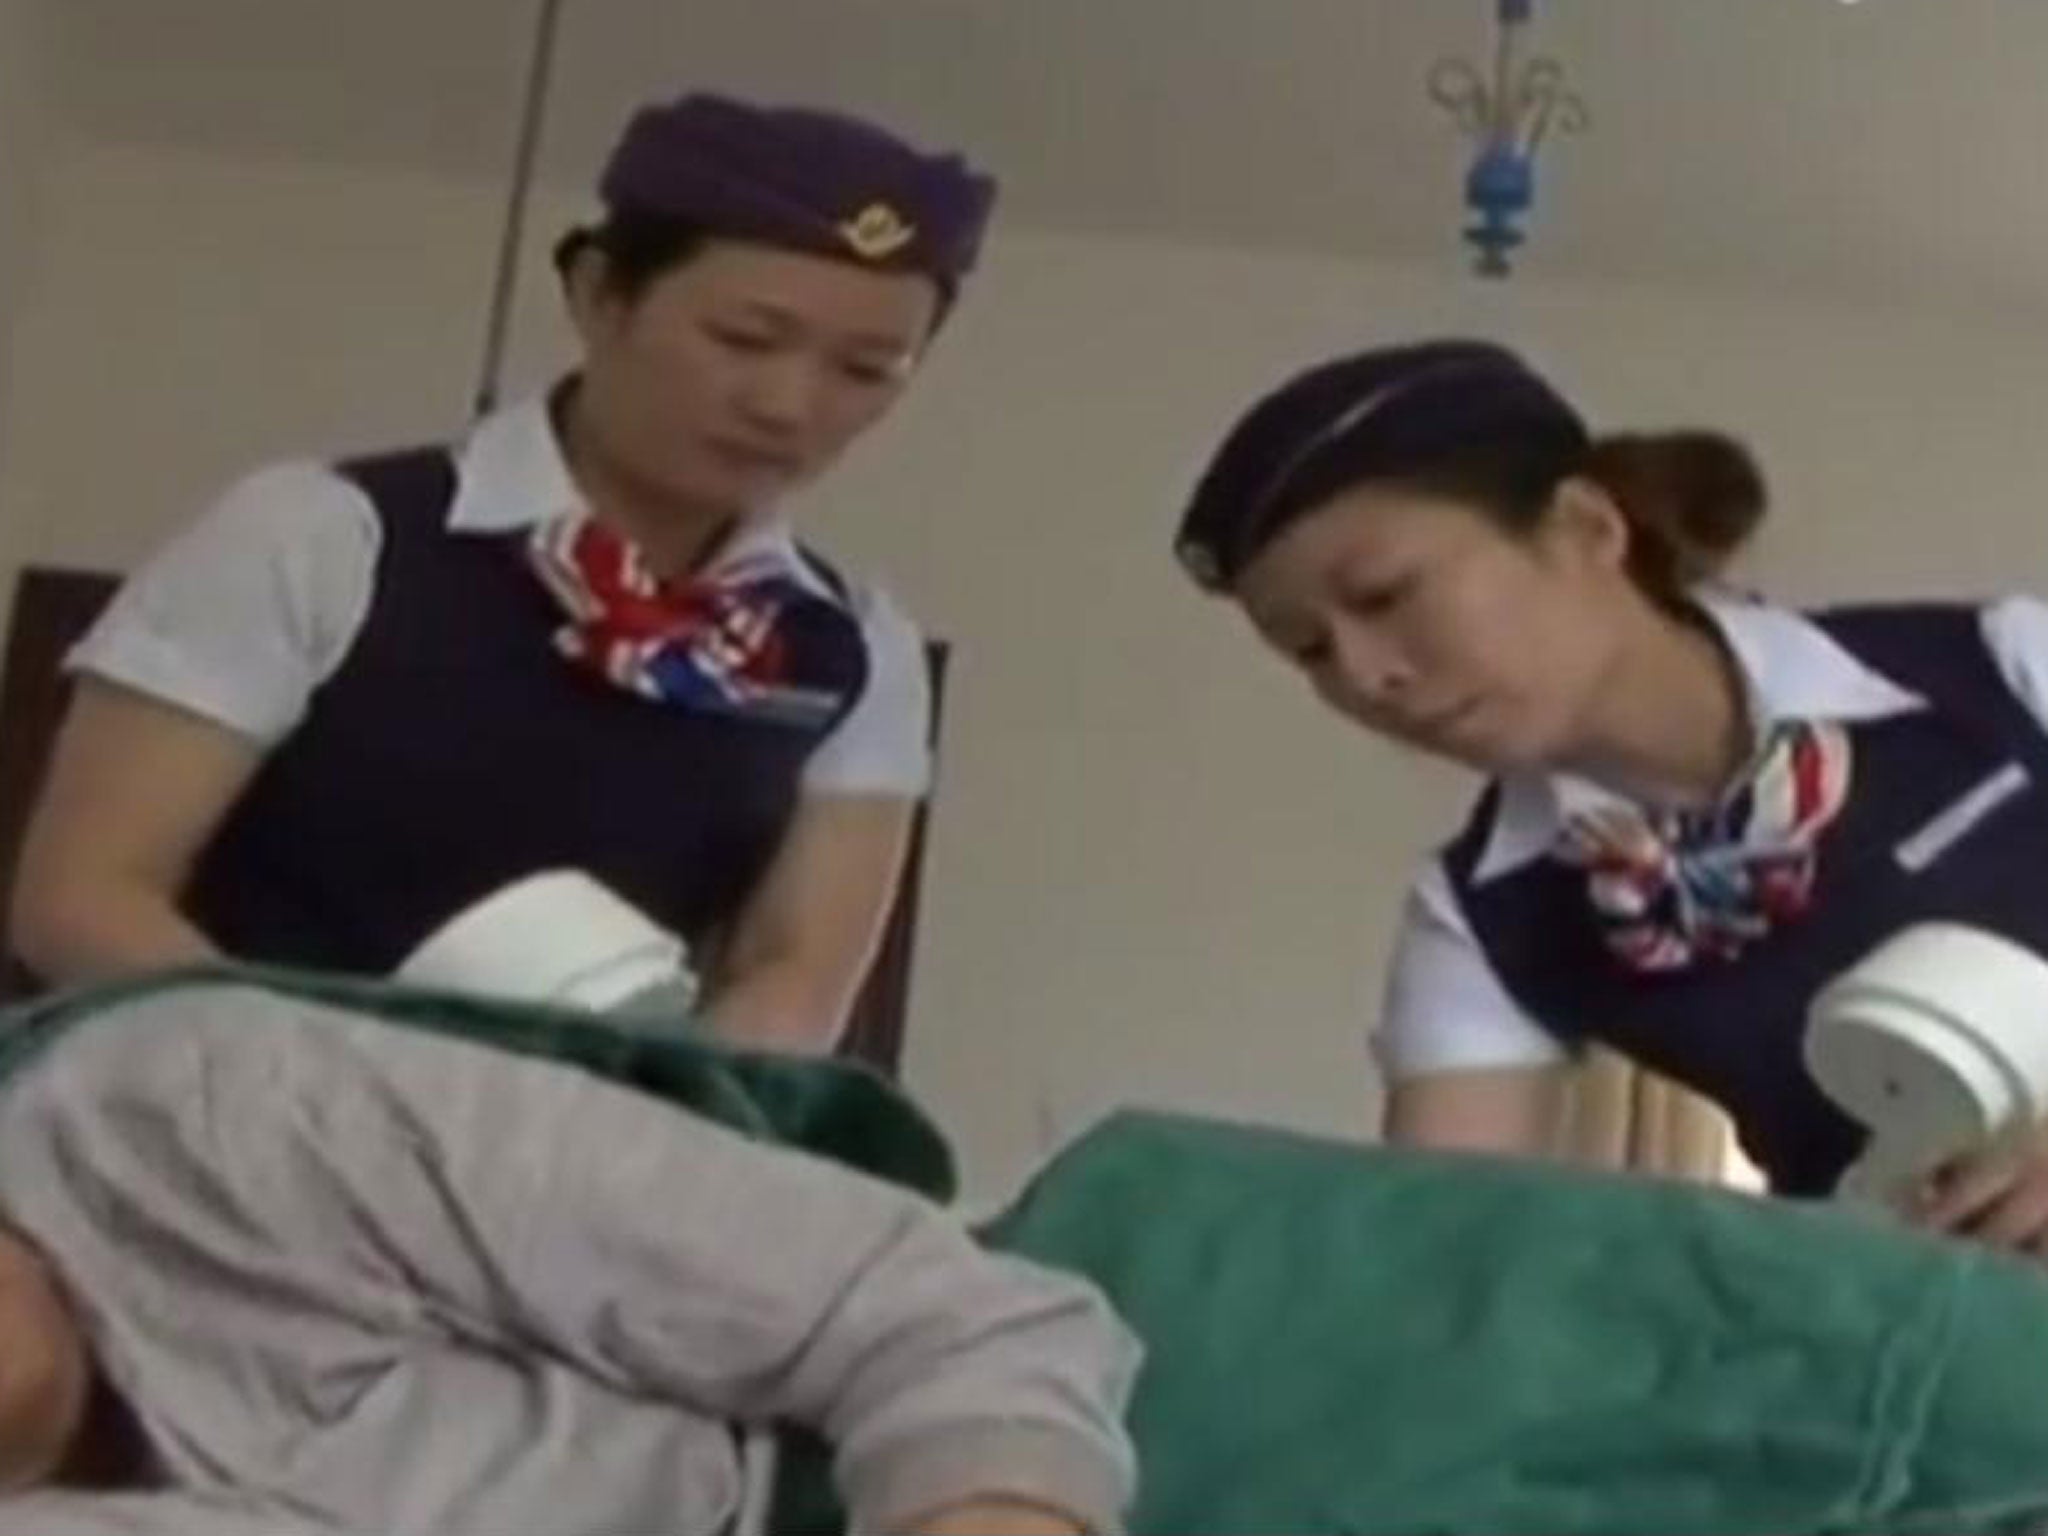 A Chinese Hospital has apparently asked nursing staff to wear air hostess uniforms at work